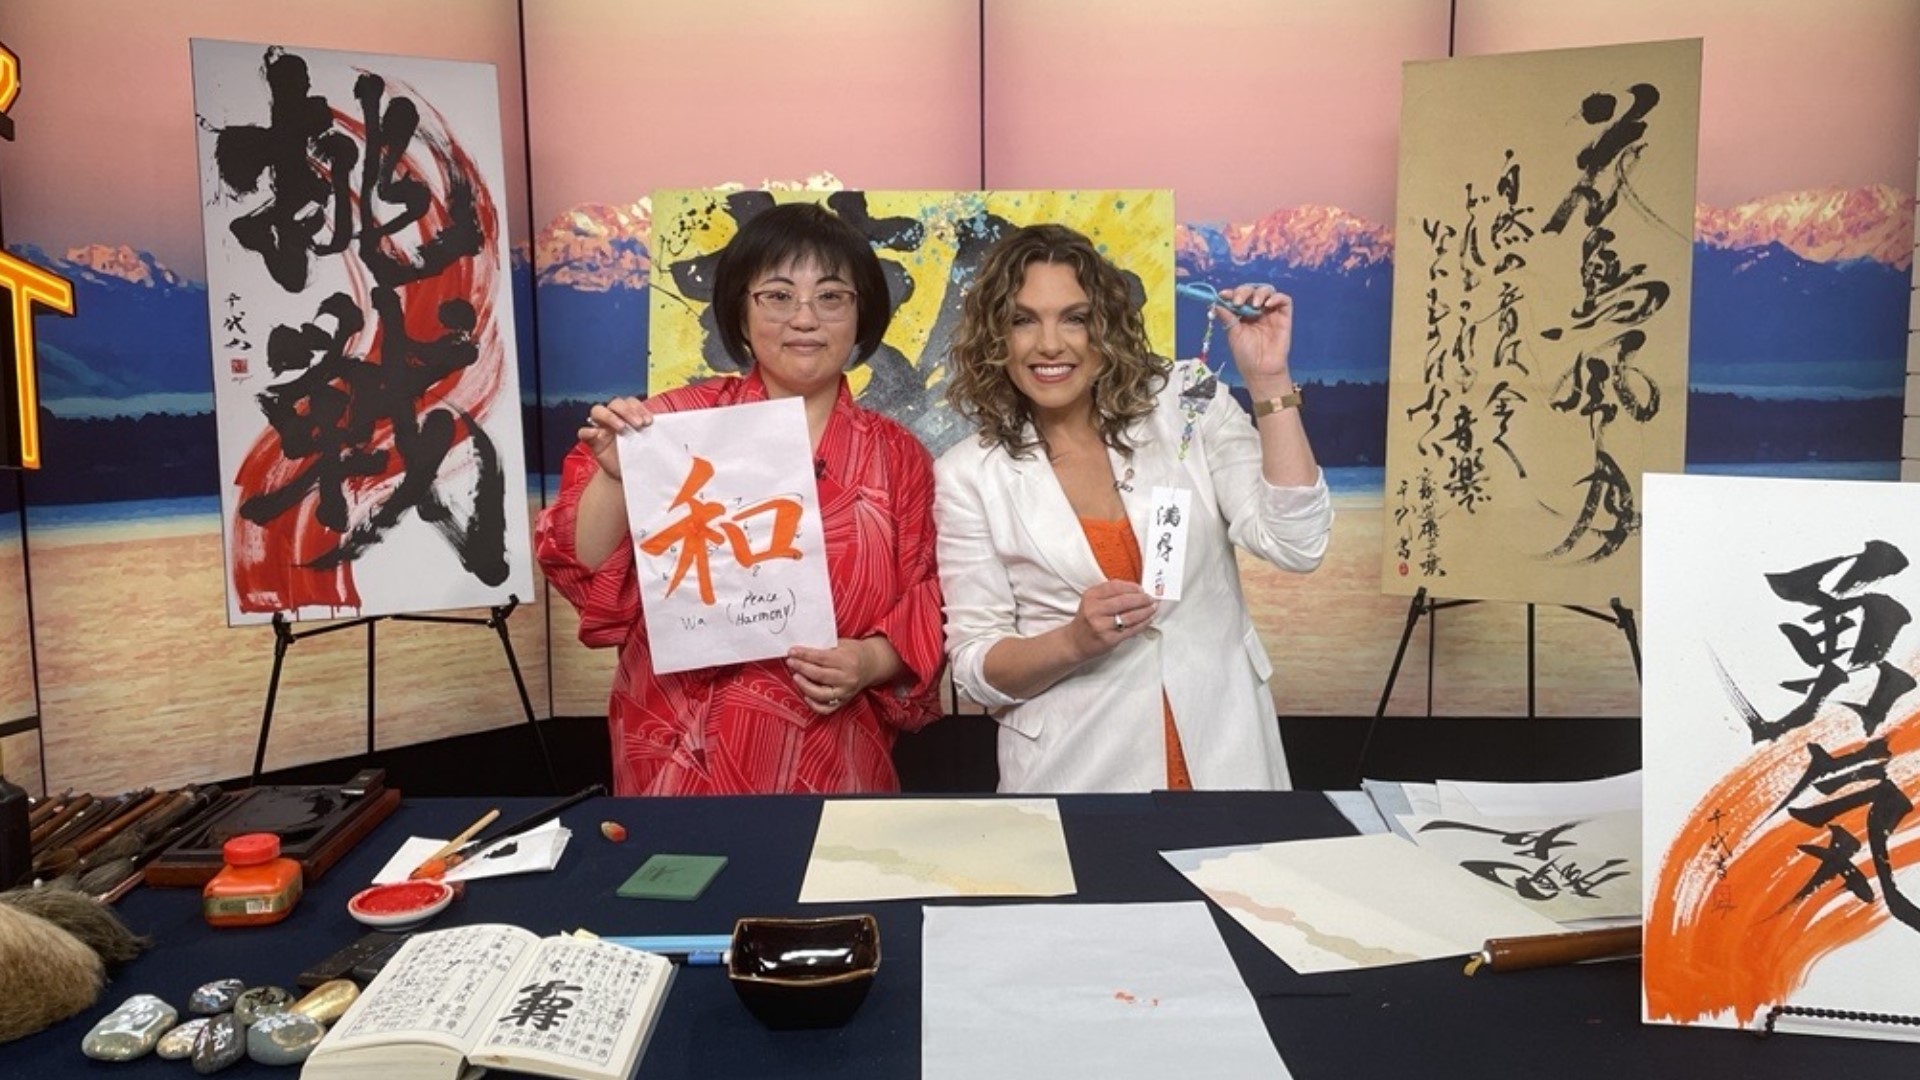 Chiyo Sanada, a Japanese calligraphy artist, shows us how she creates her artwork. #newdaynw